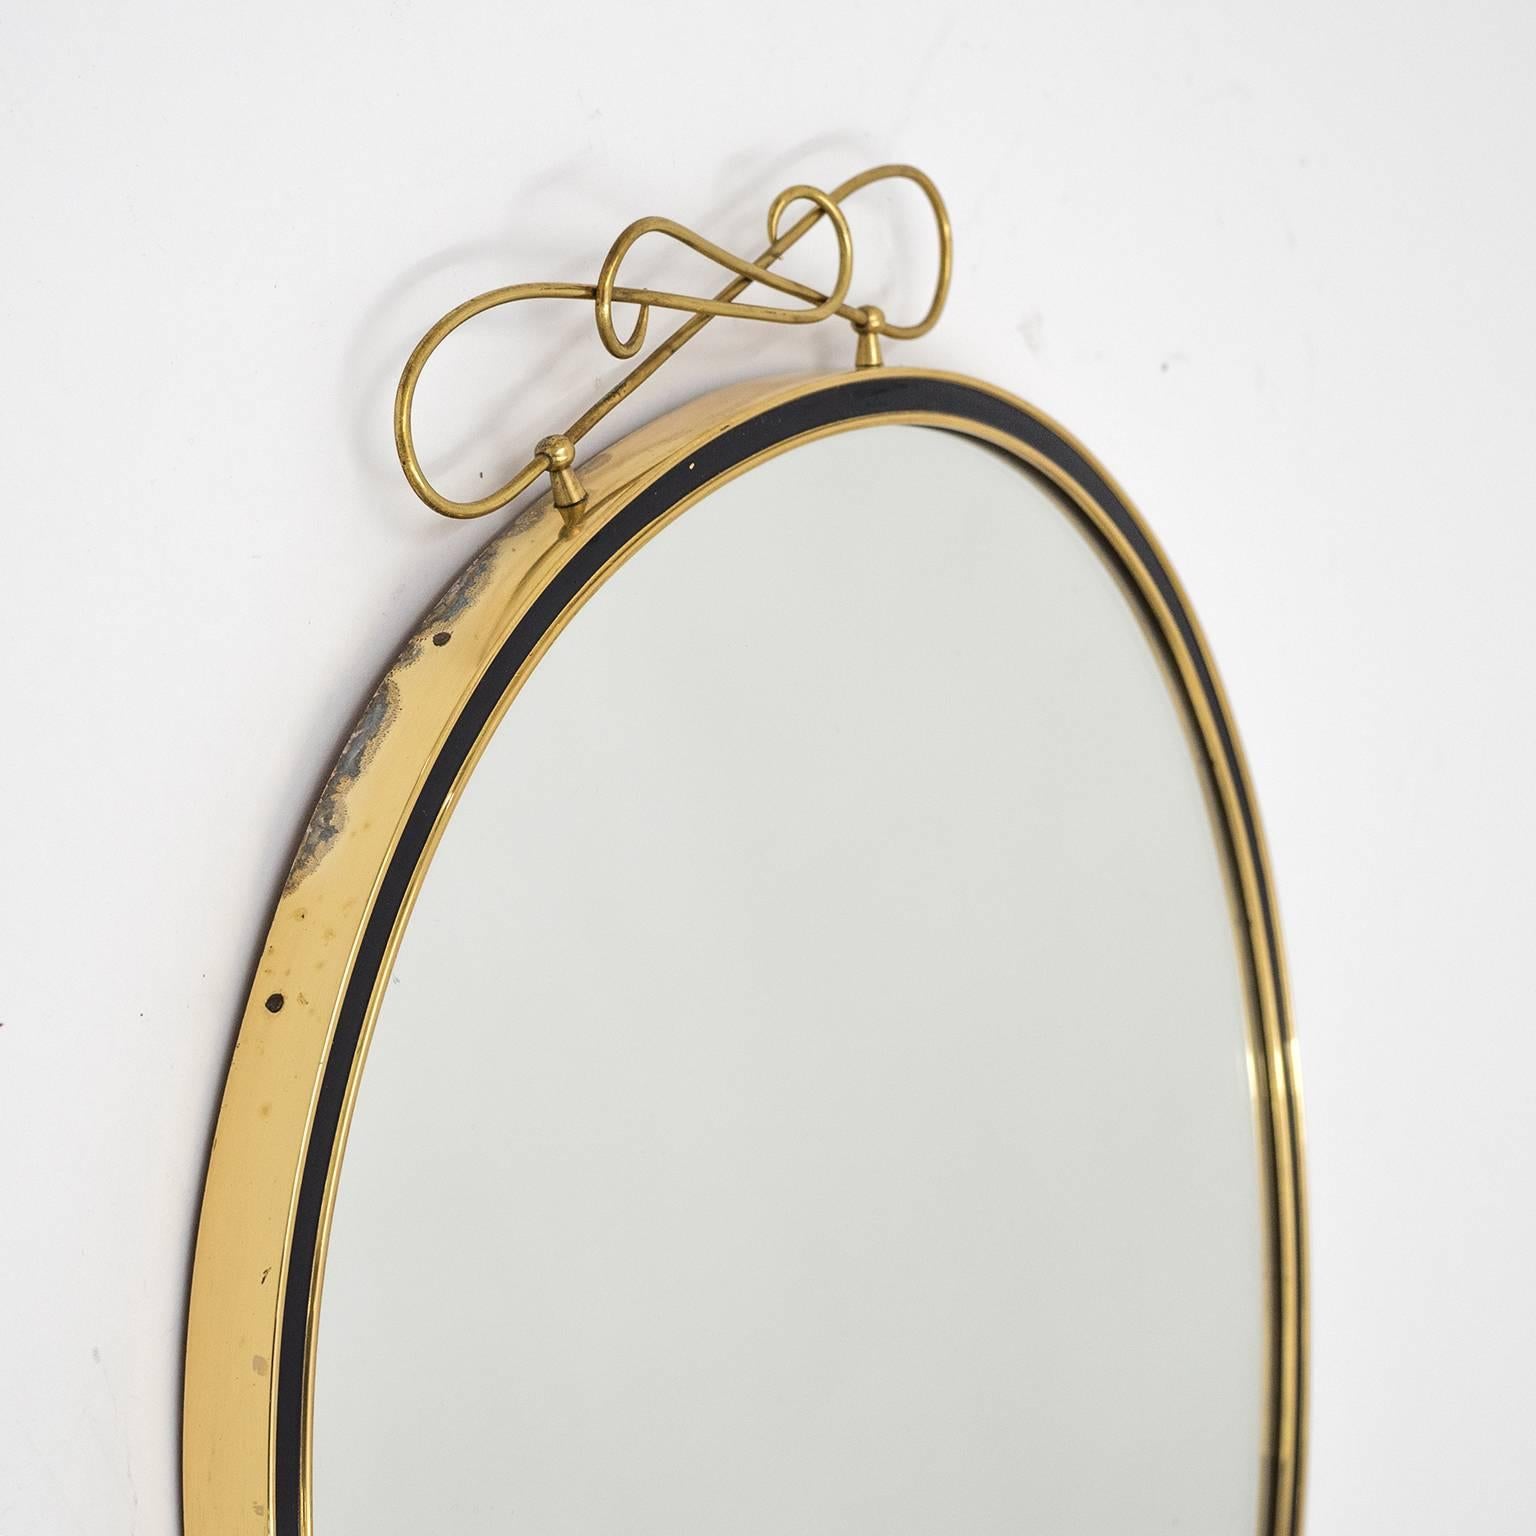 Oval Brass and Enameled Wall Mirror, 1950s (Deutsch)